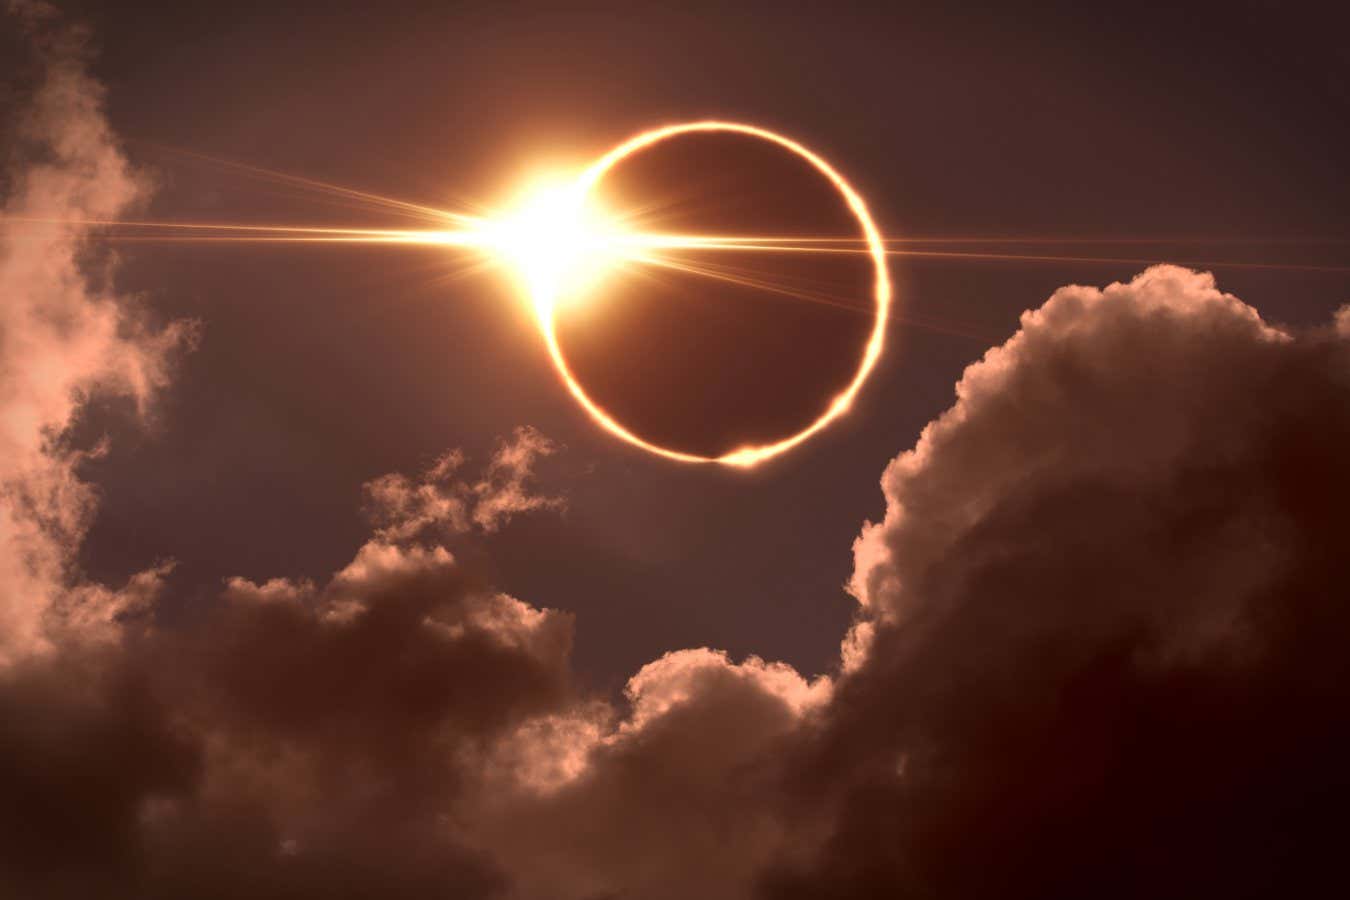 When is the next total solar eclipse visible from the UK? New York